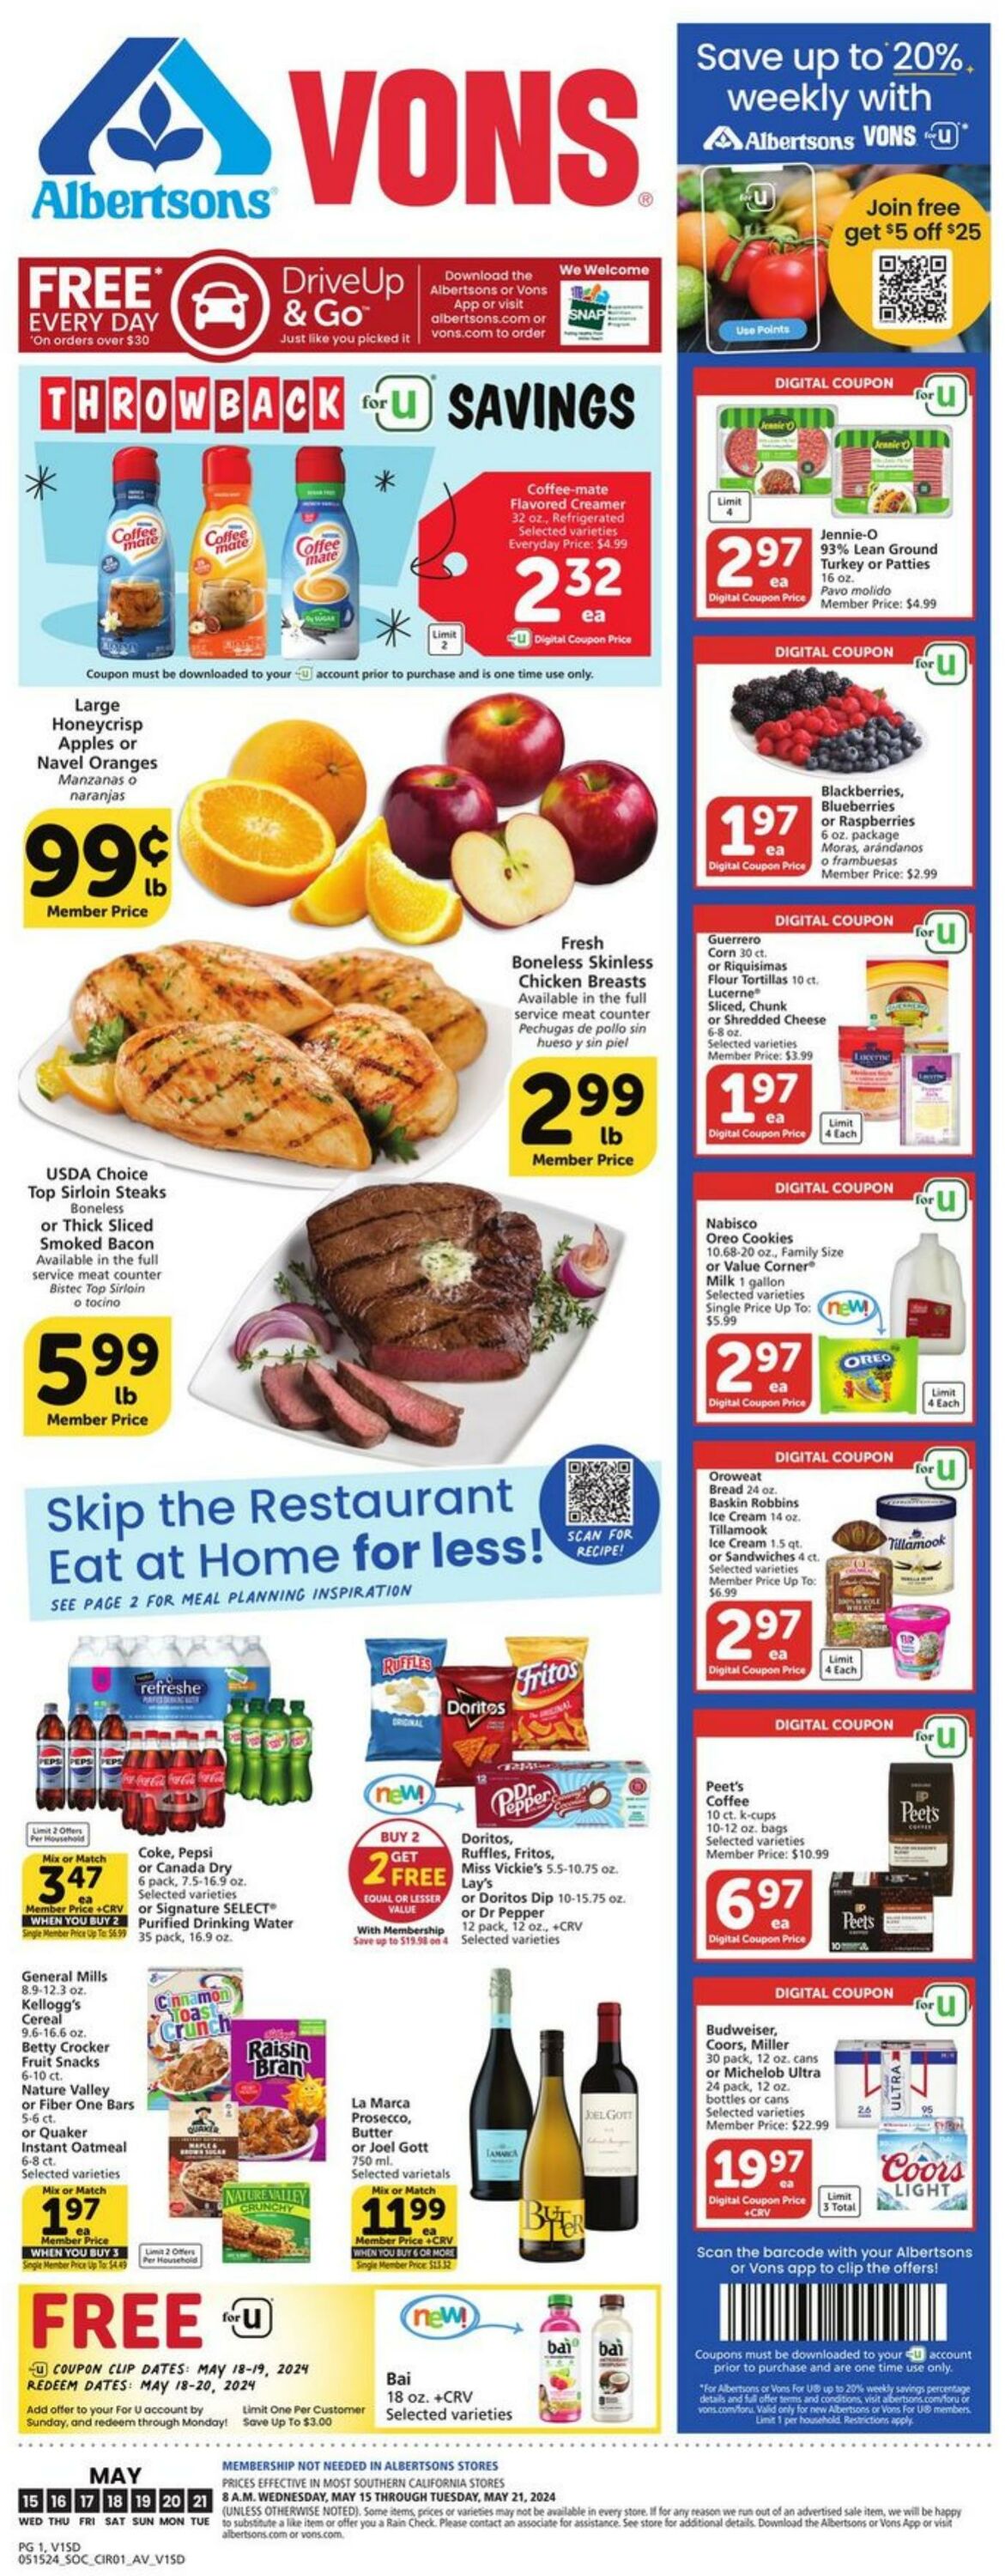 Vons Promotional weekly ads